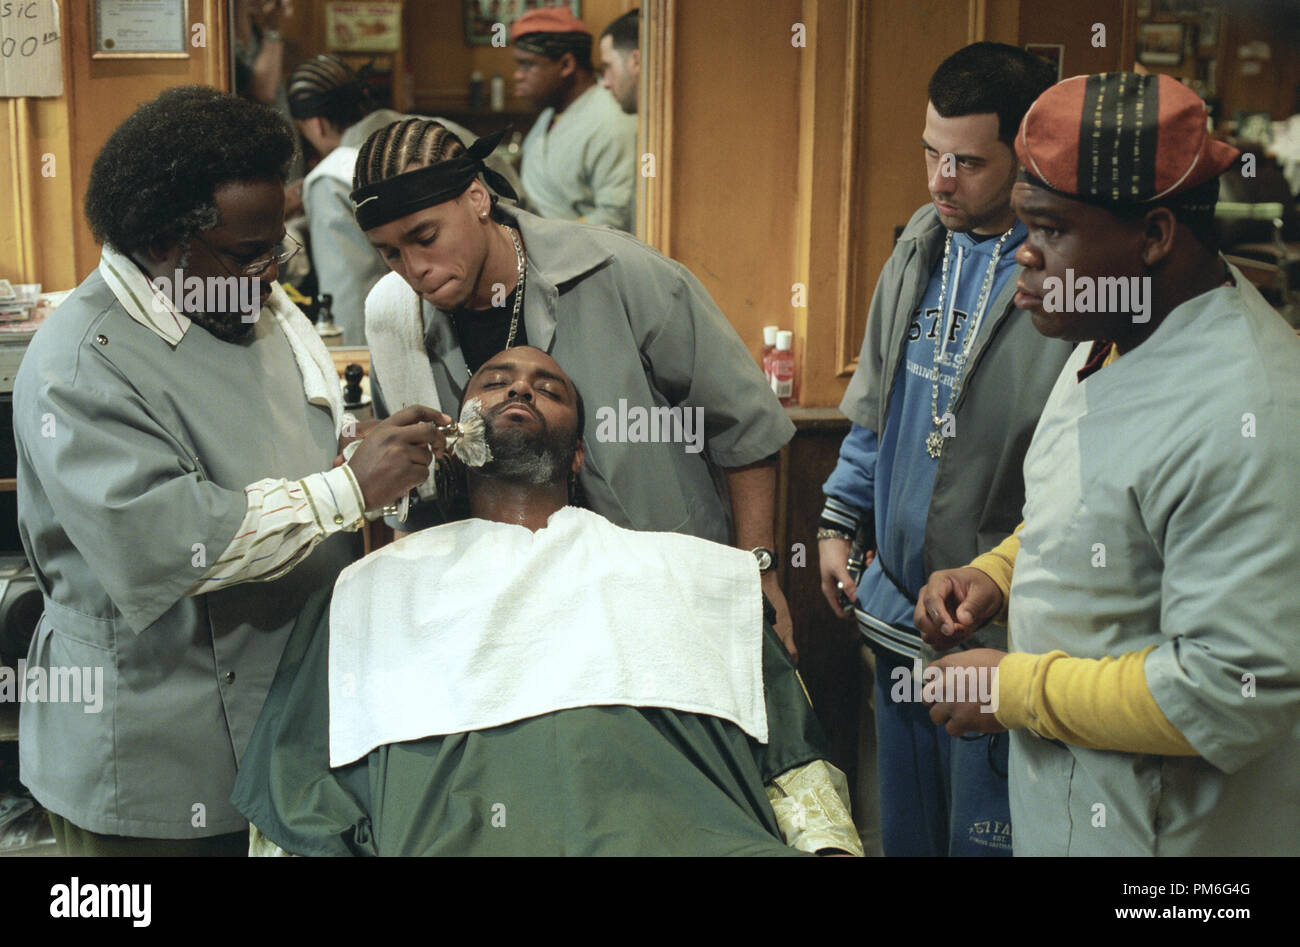 Film Still / Publicity Still from 'Barbershop' Michael Ealy, Troy Garity, Leonard Howze, Cedric the Entertainer © 2002 MGM Photo Credit: Tracy Bennett Stock Photo